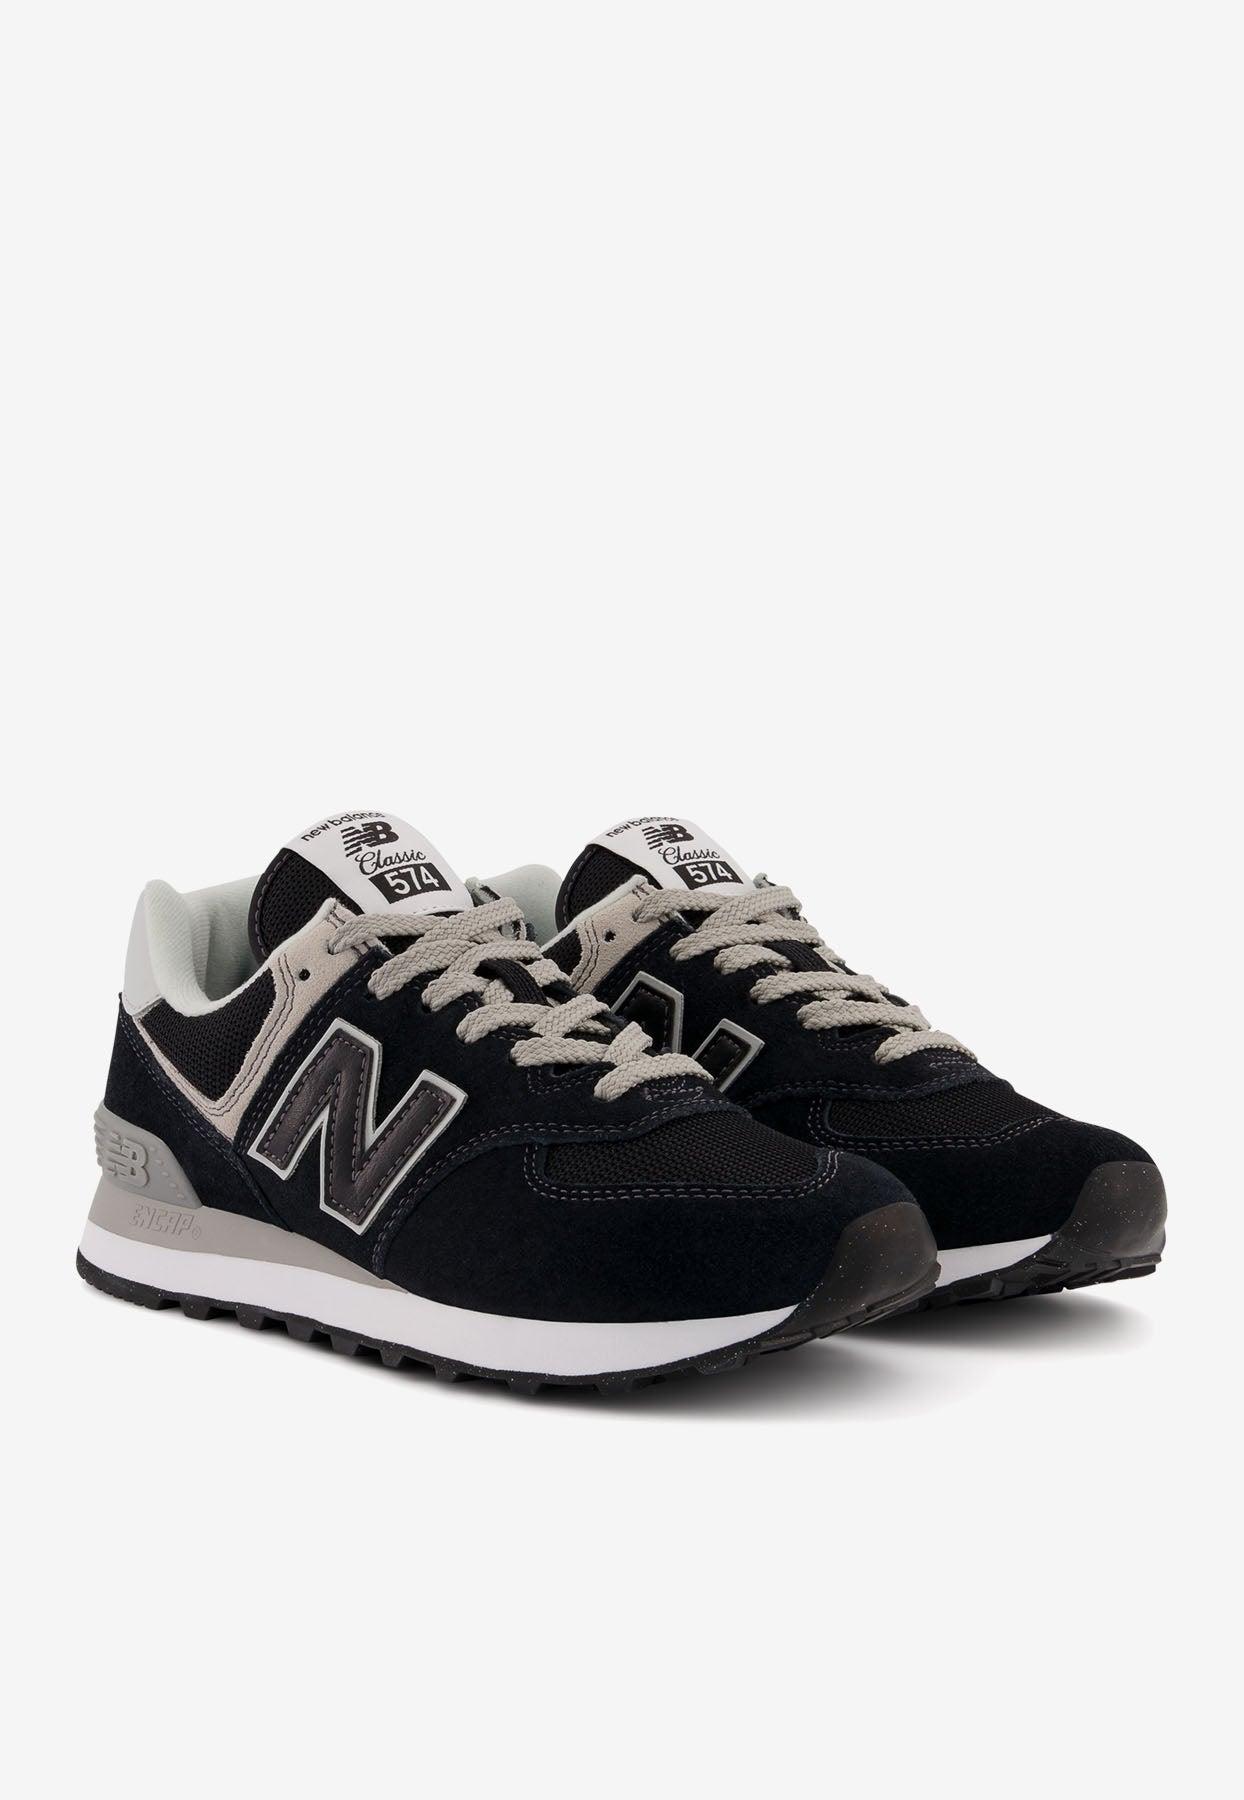 New Balance 574 Sneakers In Suede And Mesh in Black | Lyst